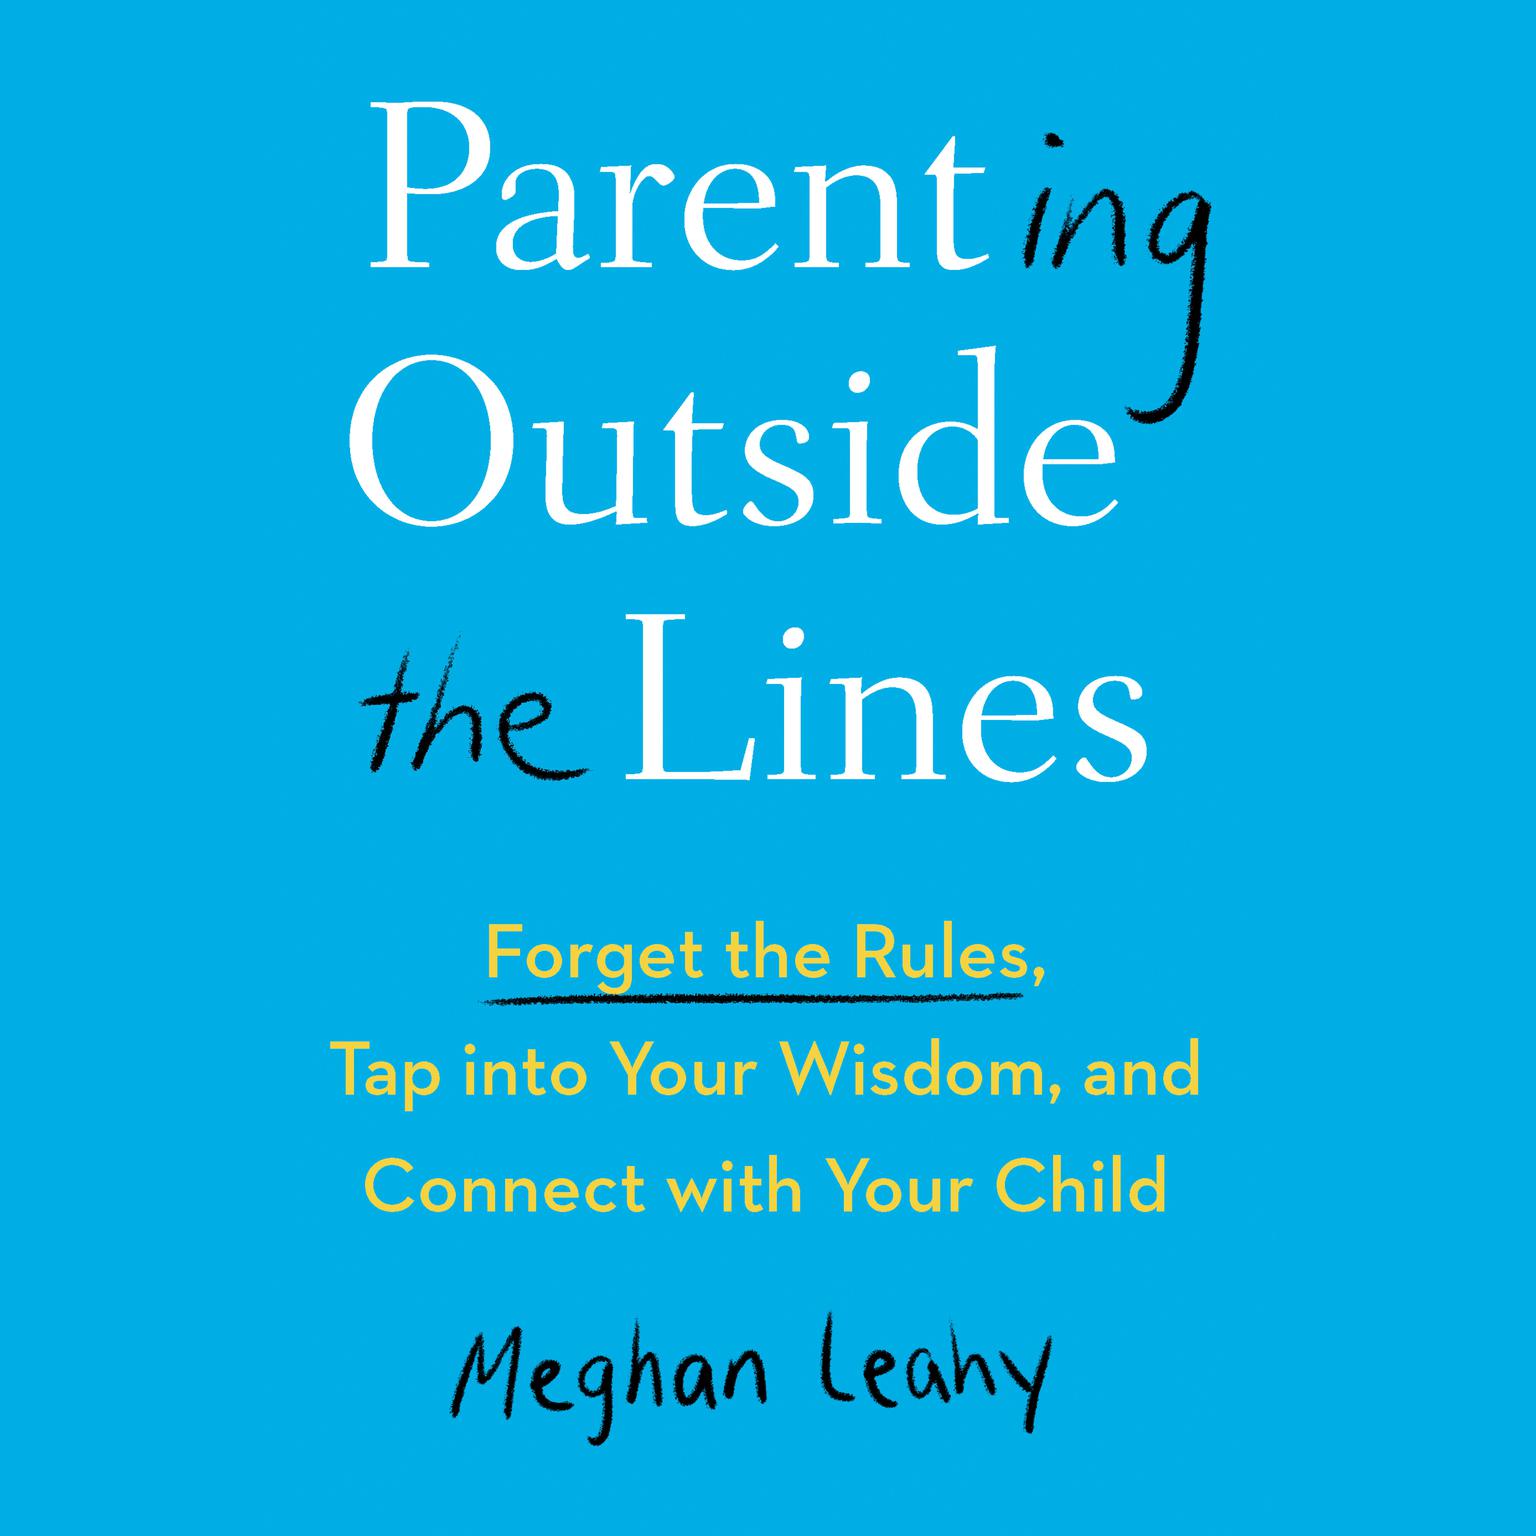 Parenting Outside the Lines: Forget the Rules, Tap into Your Wisdom, and Connect with Your Child Audiobook, by Meghan Leahy